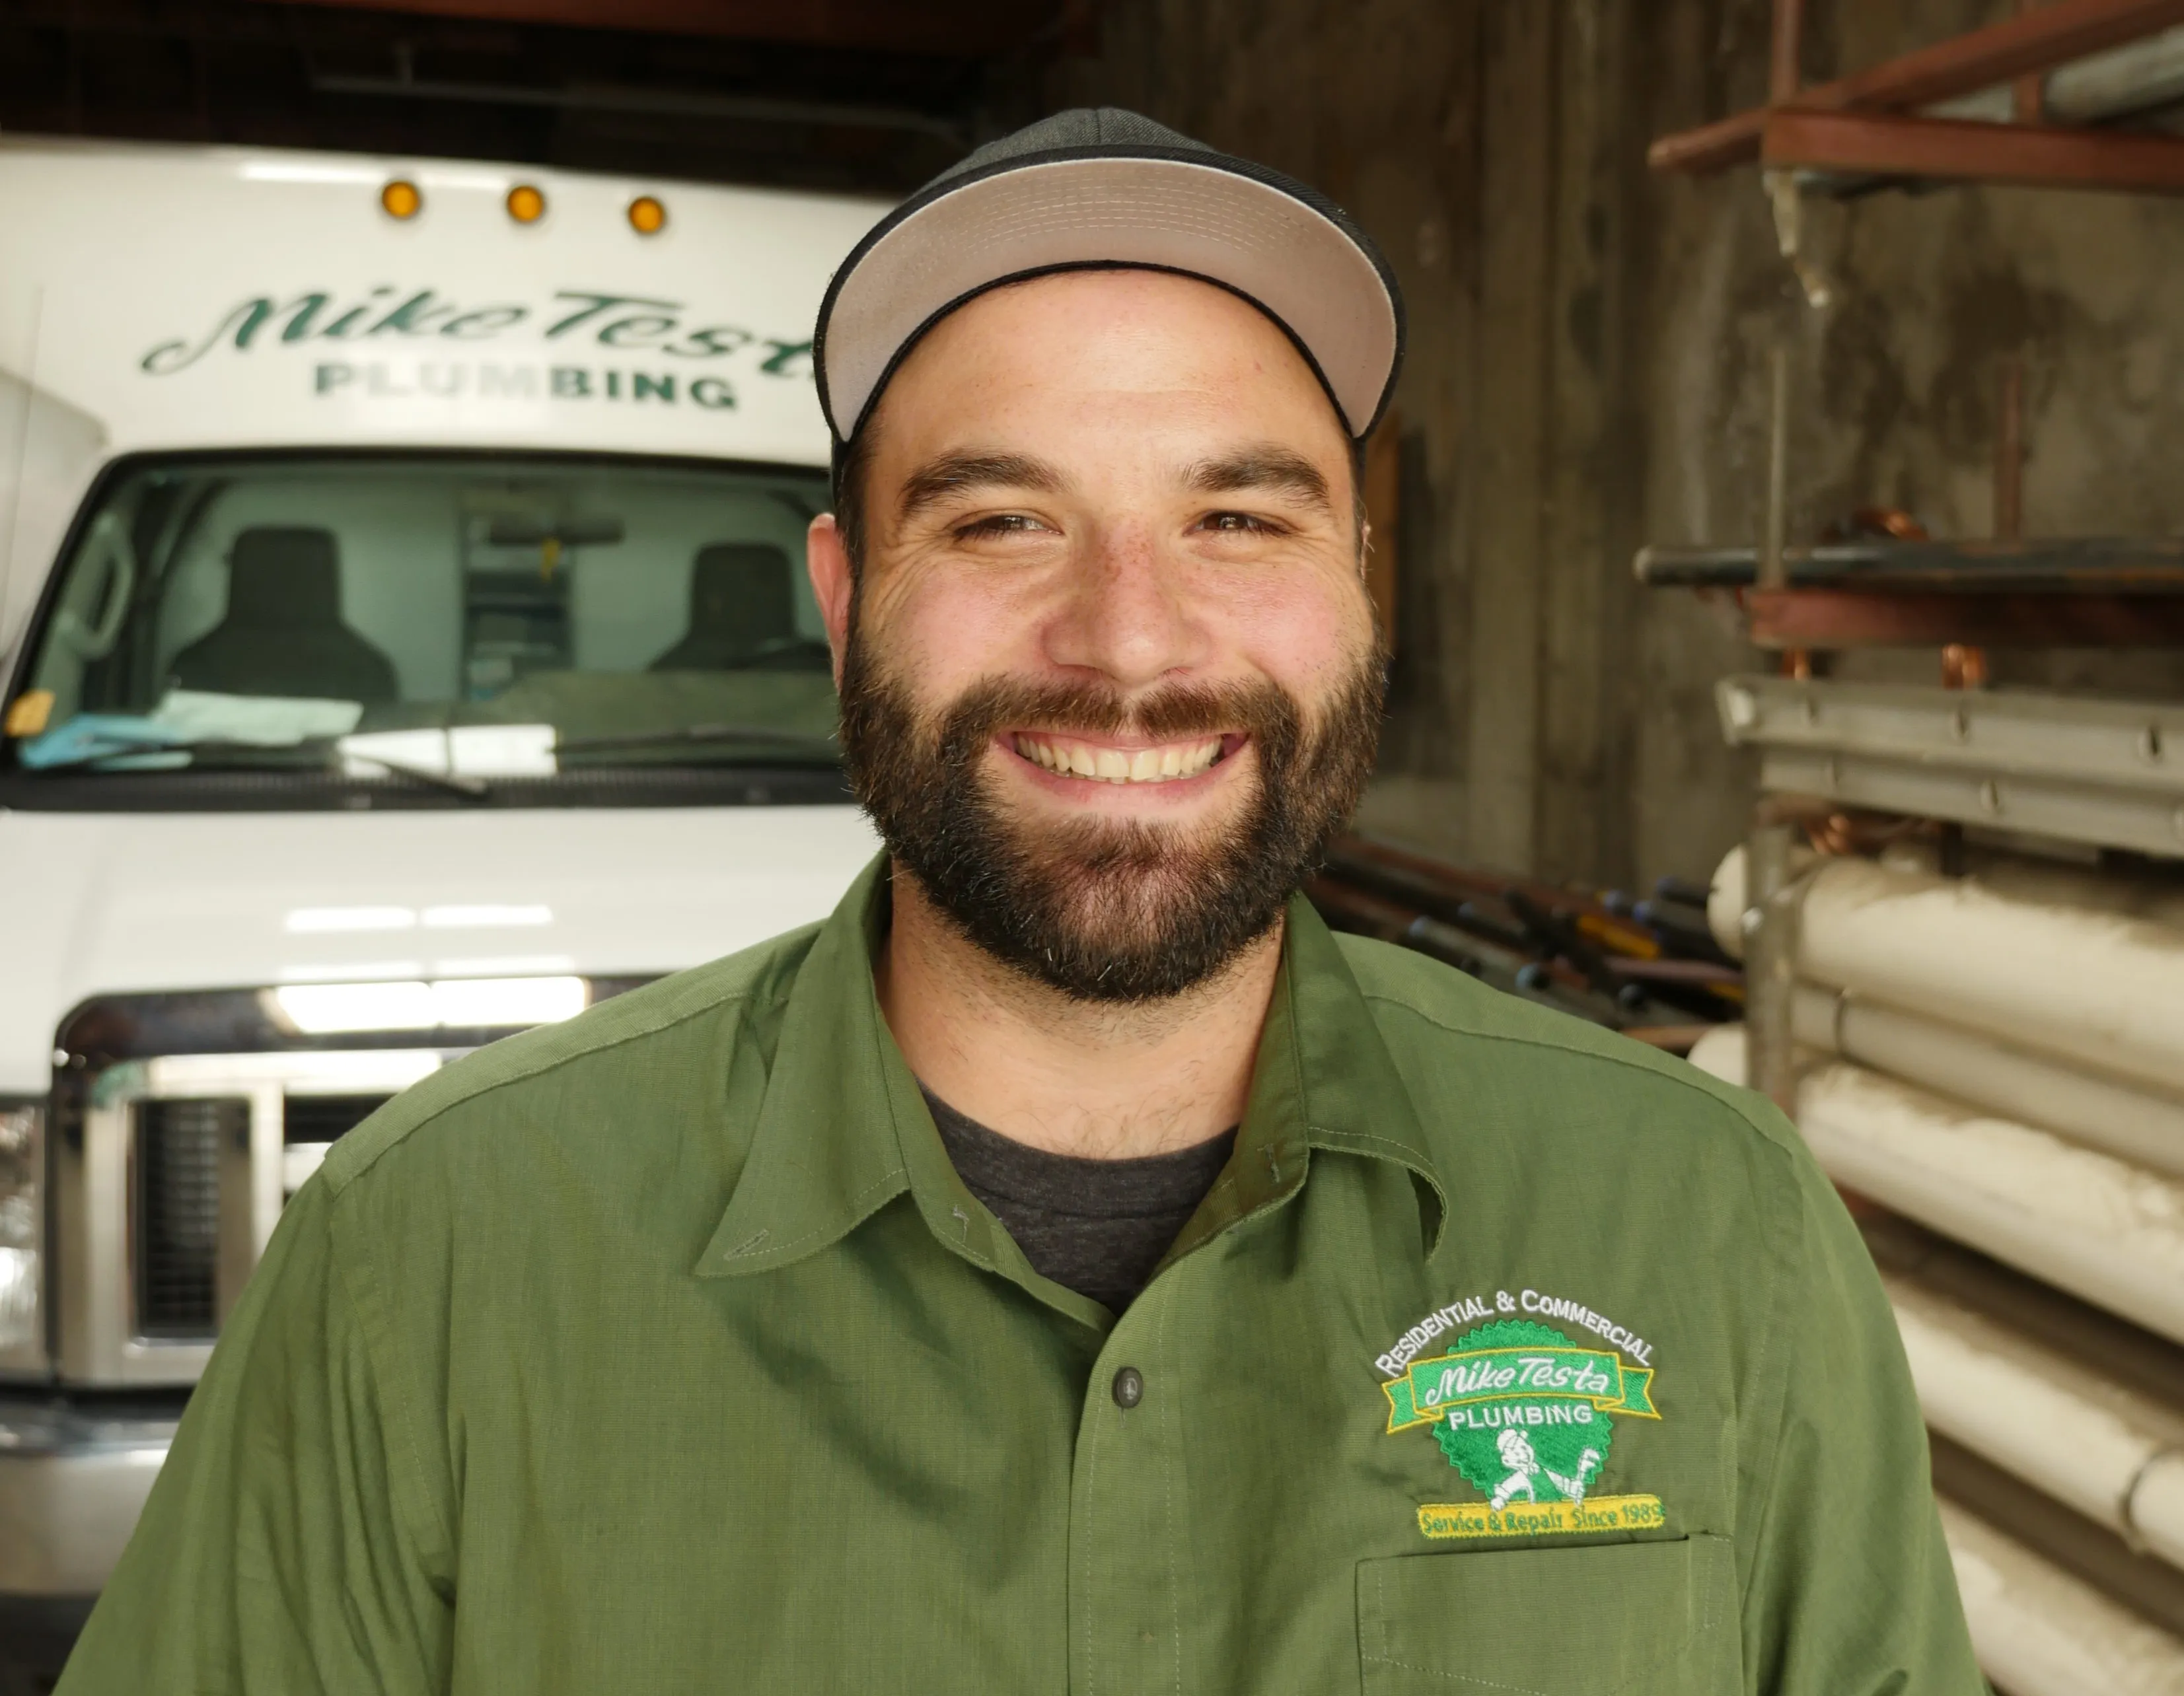 Kyle Barnhart is vice president of Mike Testa Plumbing, Inc., a Diamond Certified company. He can be reached at (415) 868-5917 or by email.